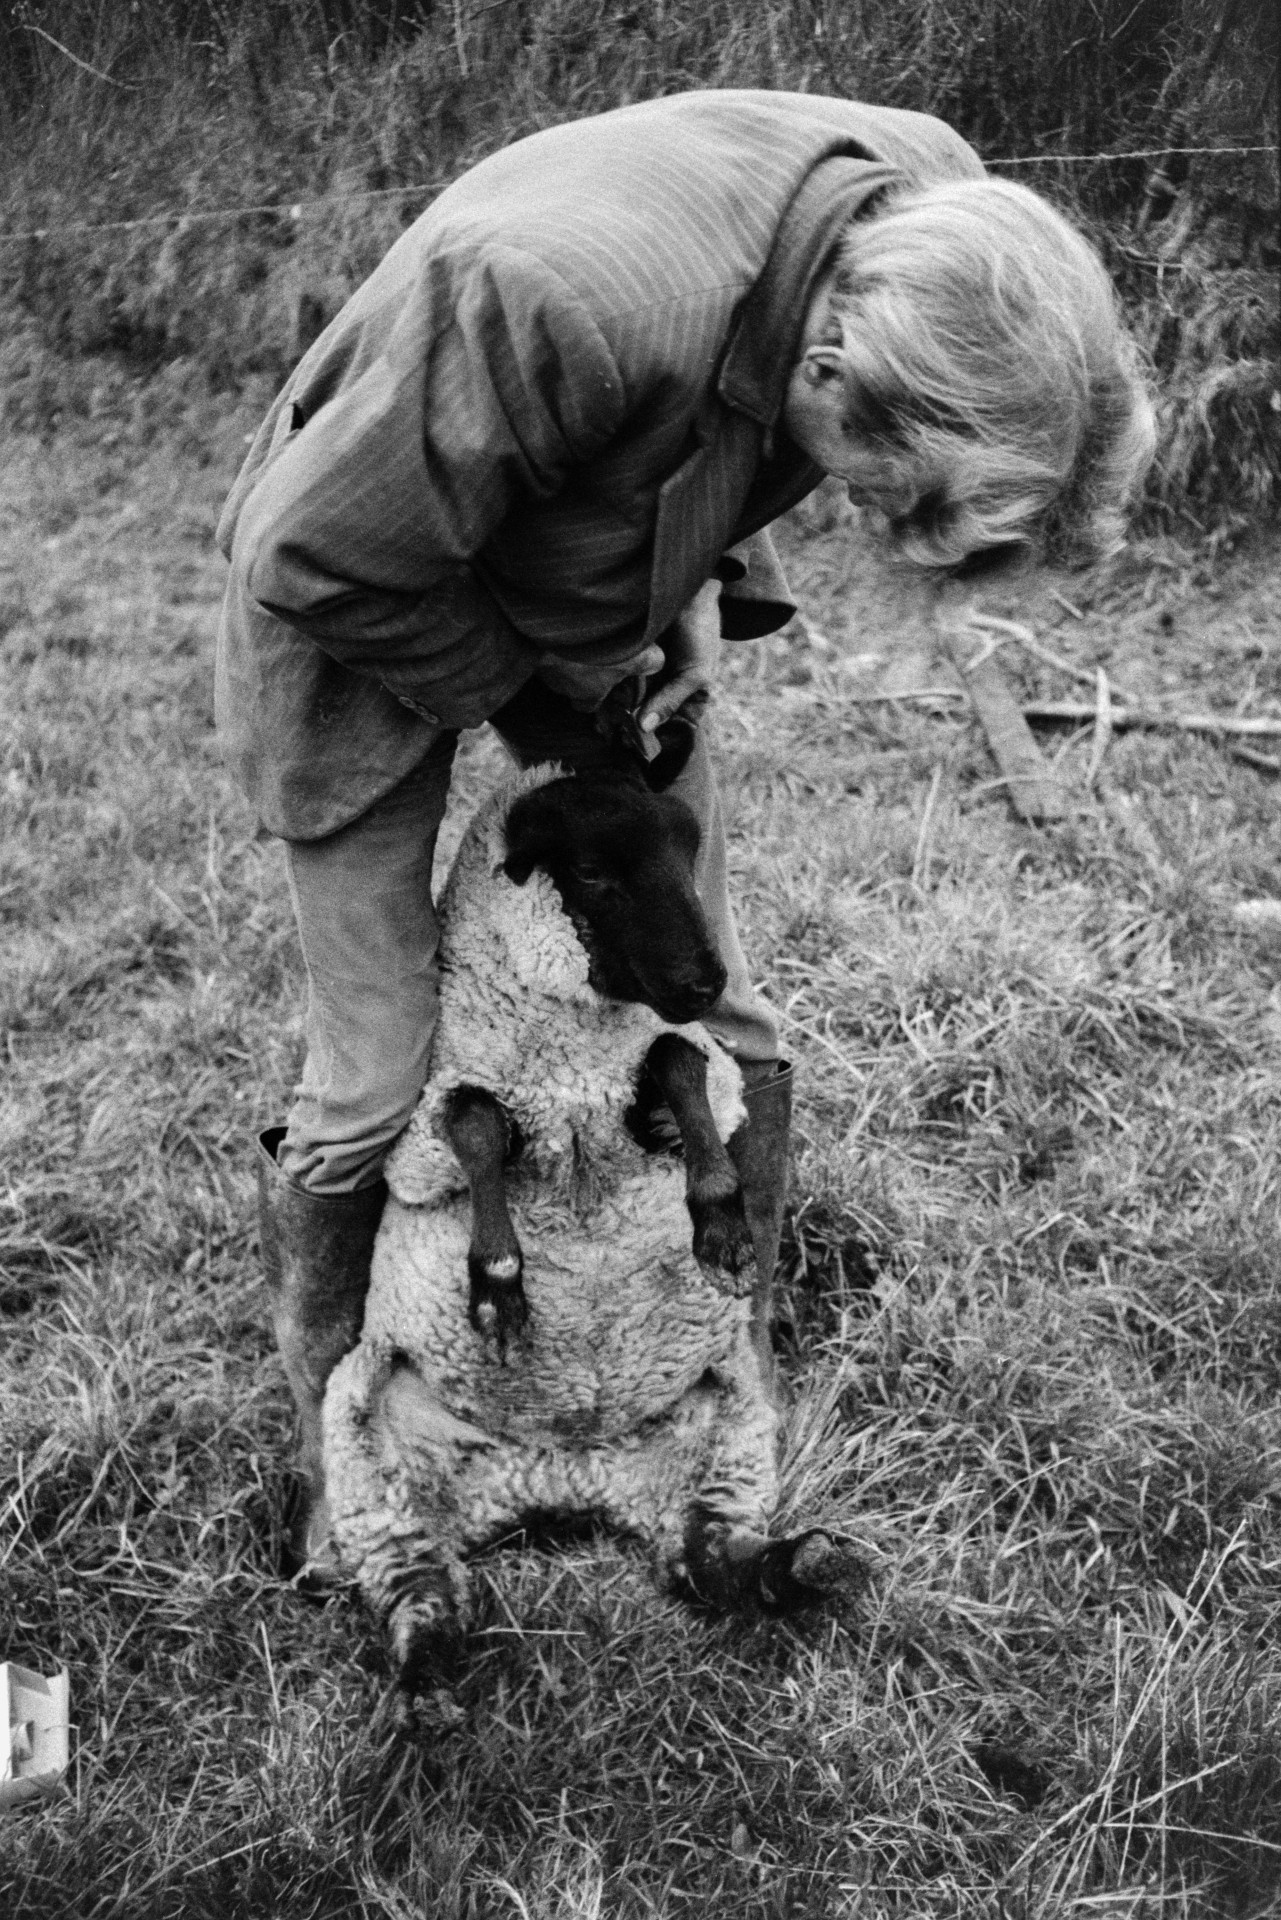 Ivor Bourne tagging one of last season's spring lambs, in a field at Mill Road Farm, Beaford, before taking it to North Devon Meat Company to be slaughtered. The farm was also known as Jeffrys.